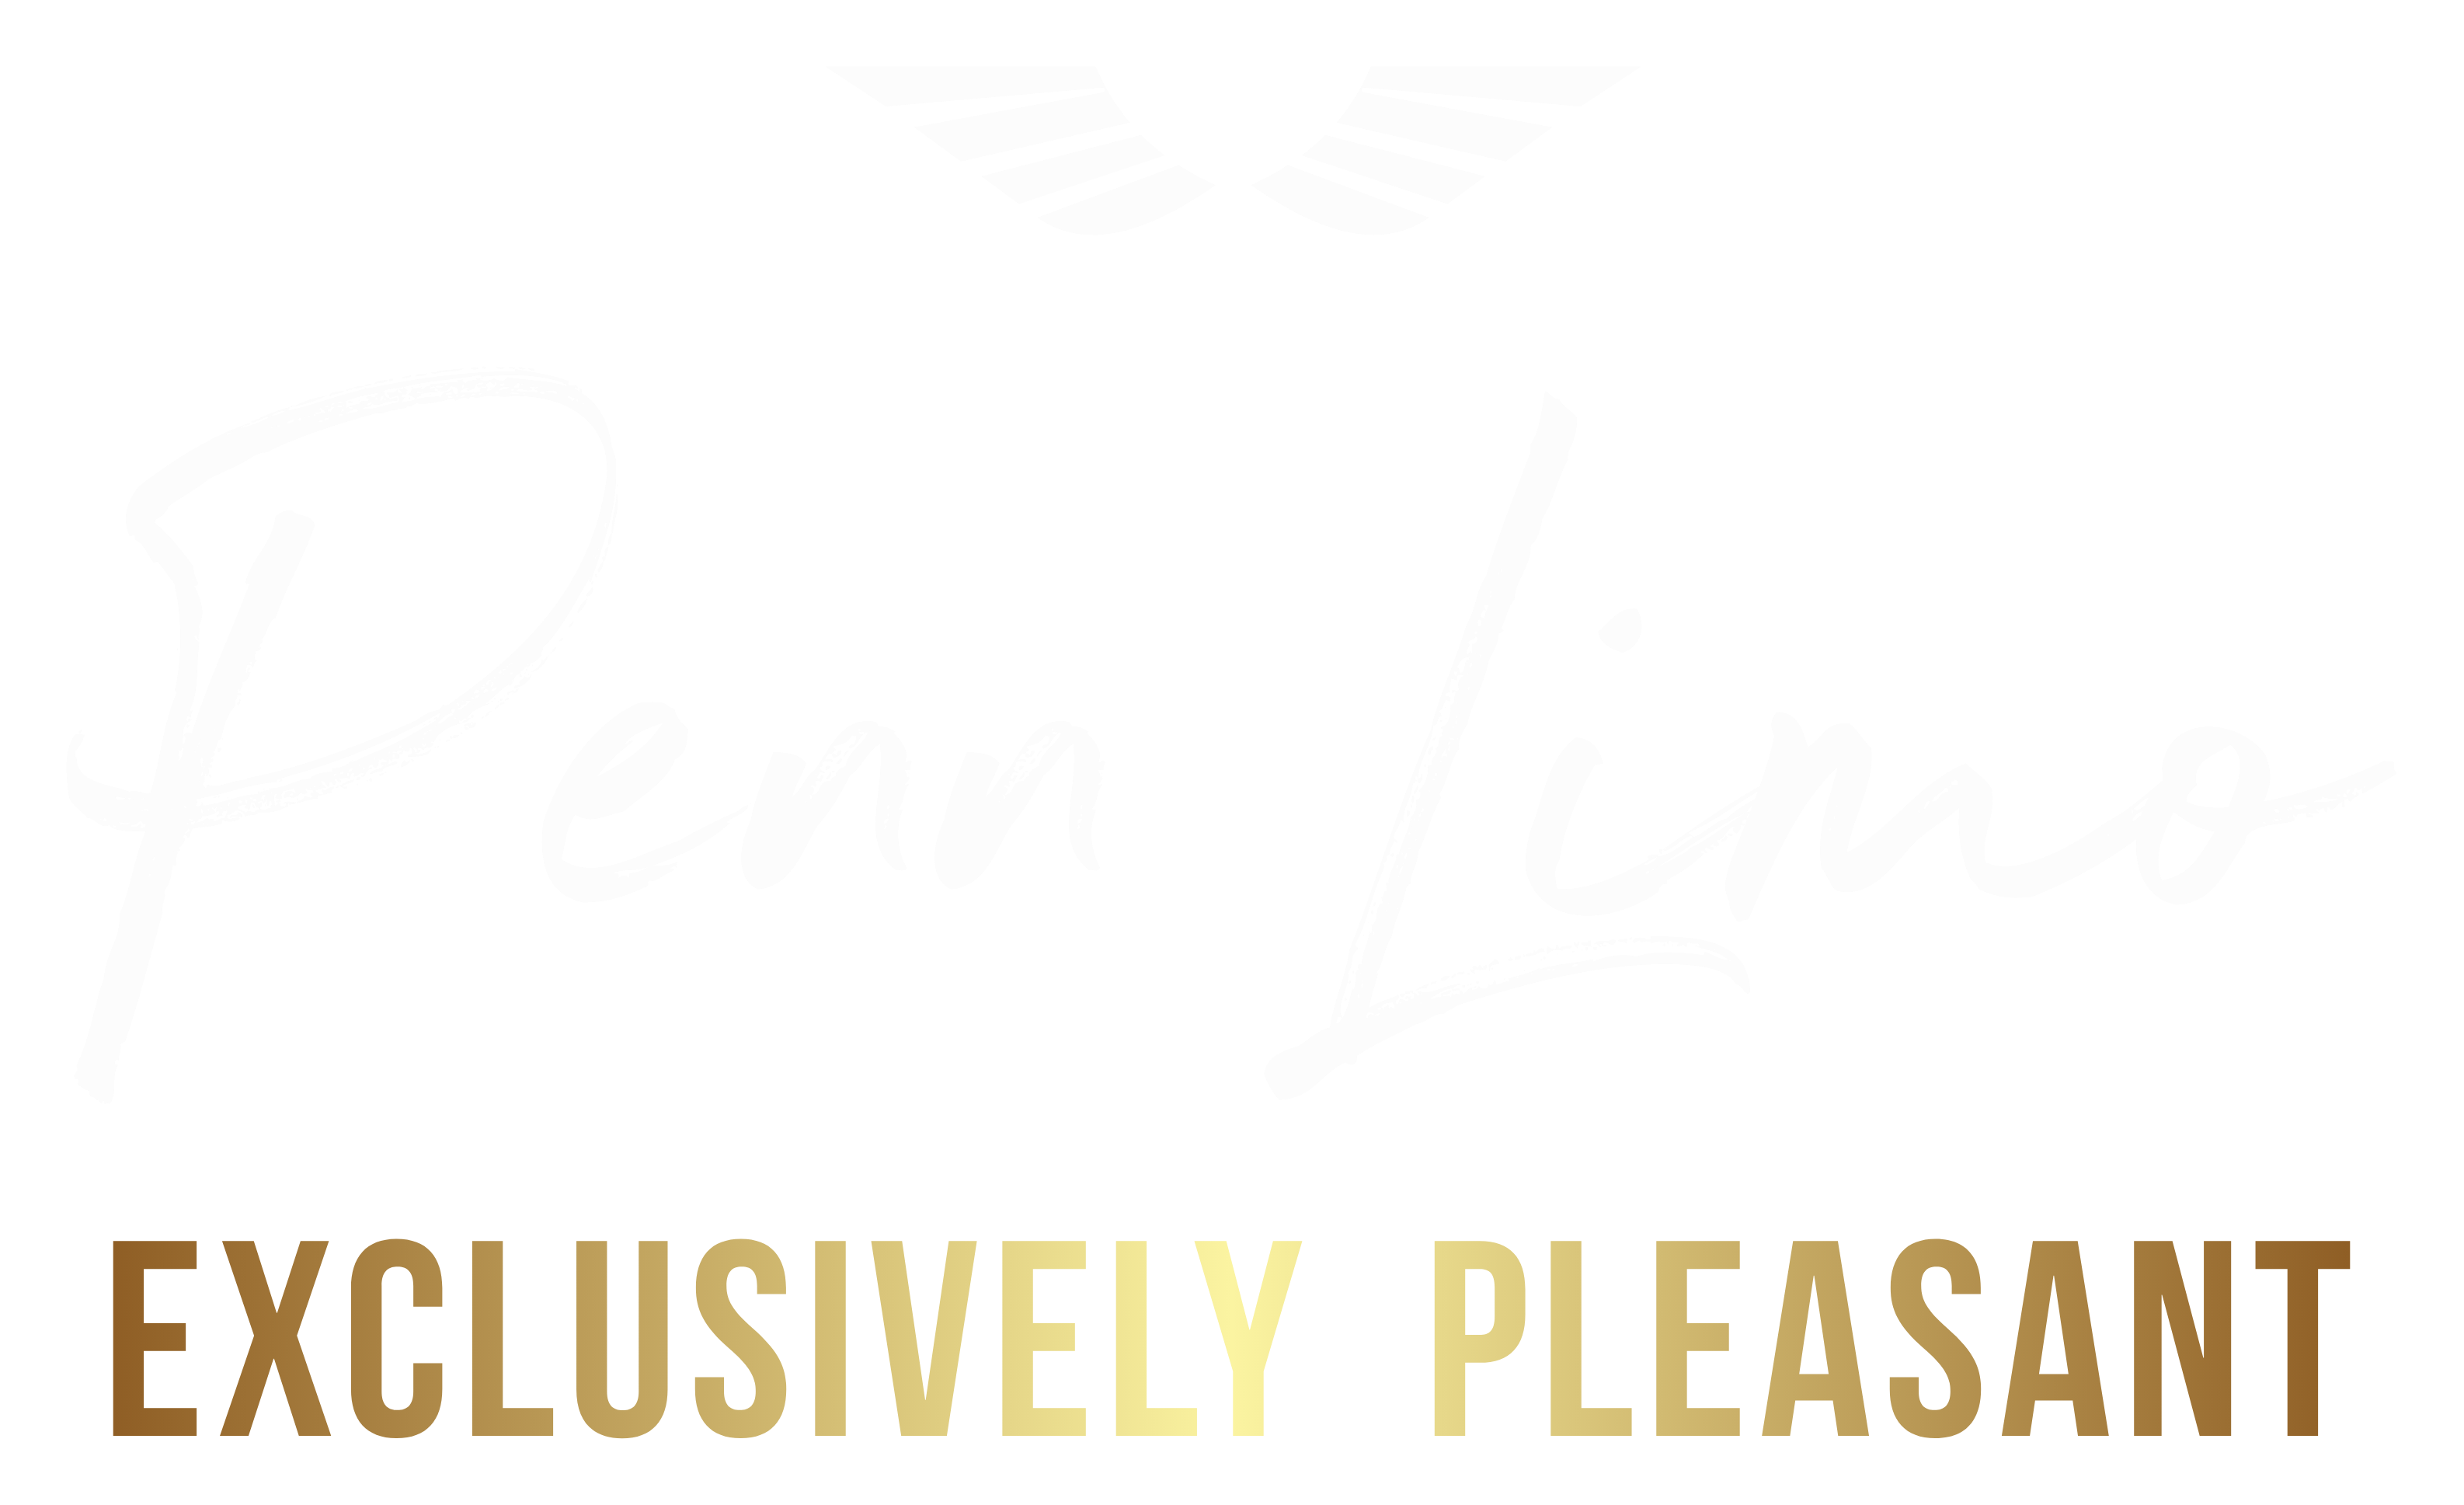 Car & Limo Service in State College | Penn Limo